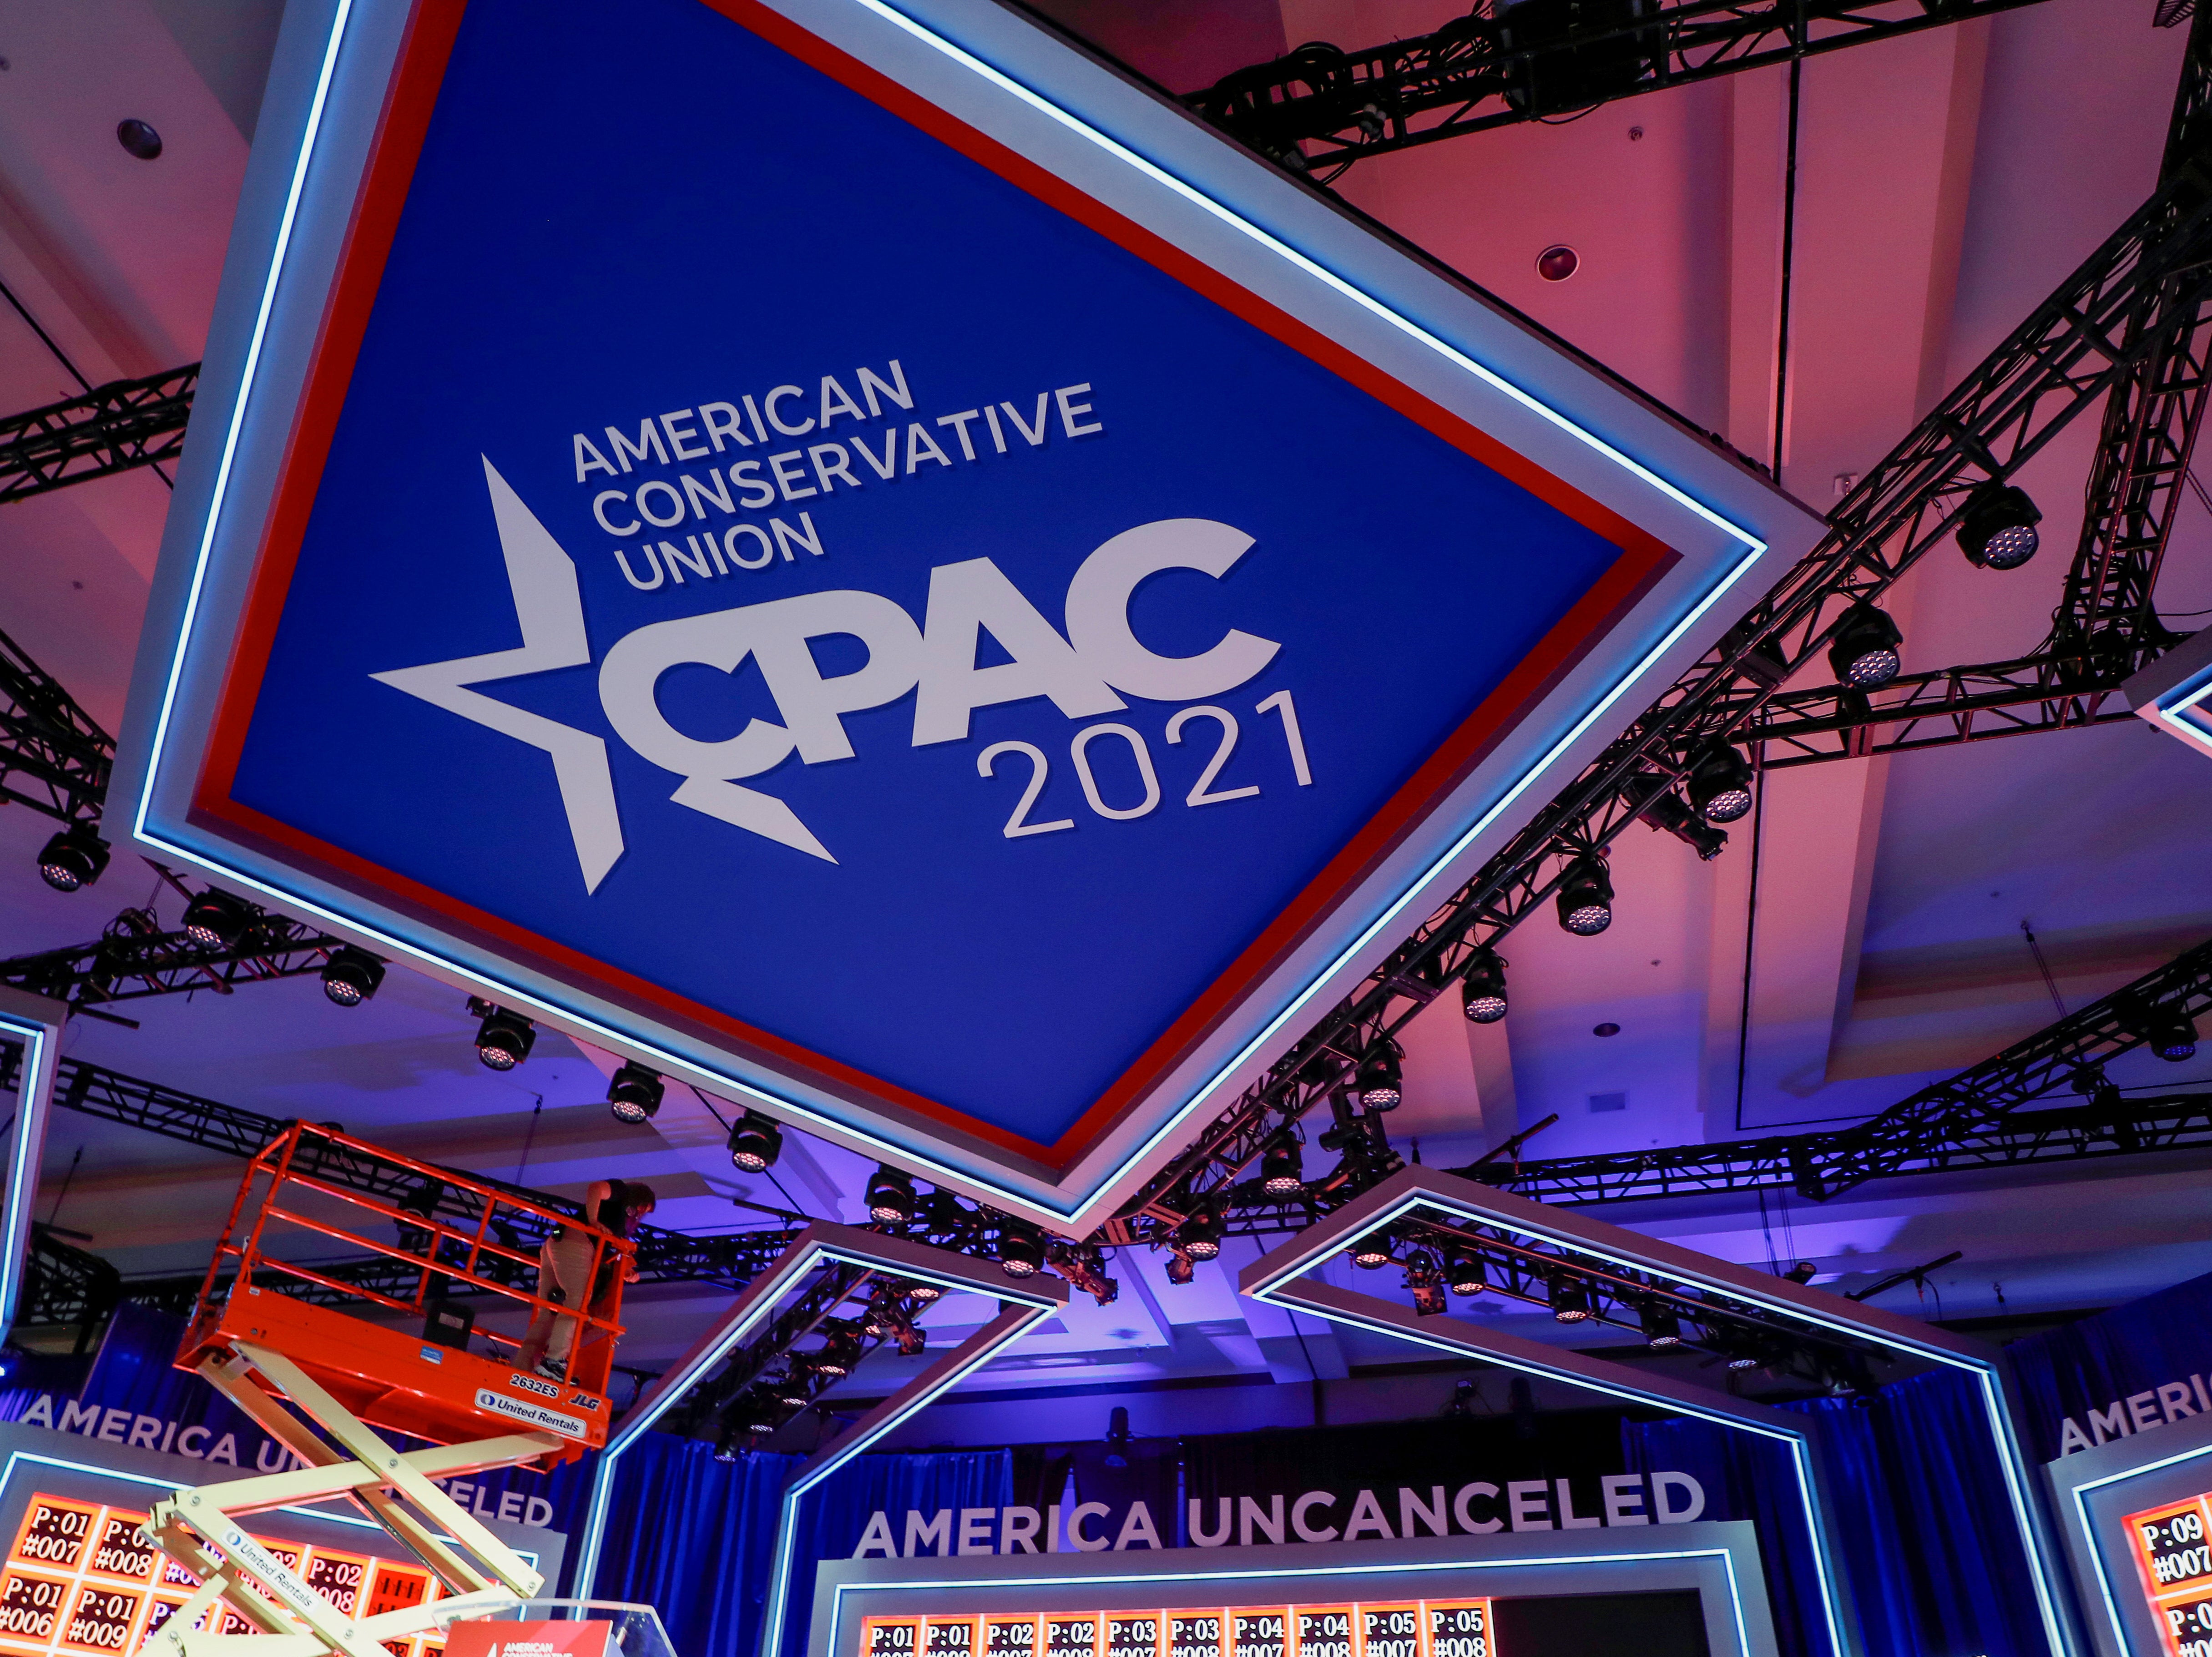 Stage design at the CPAC conference has been compared to Nazi symbol